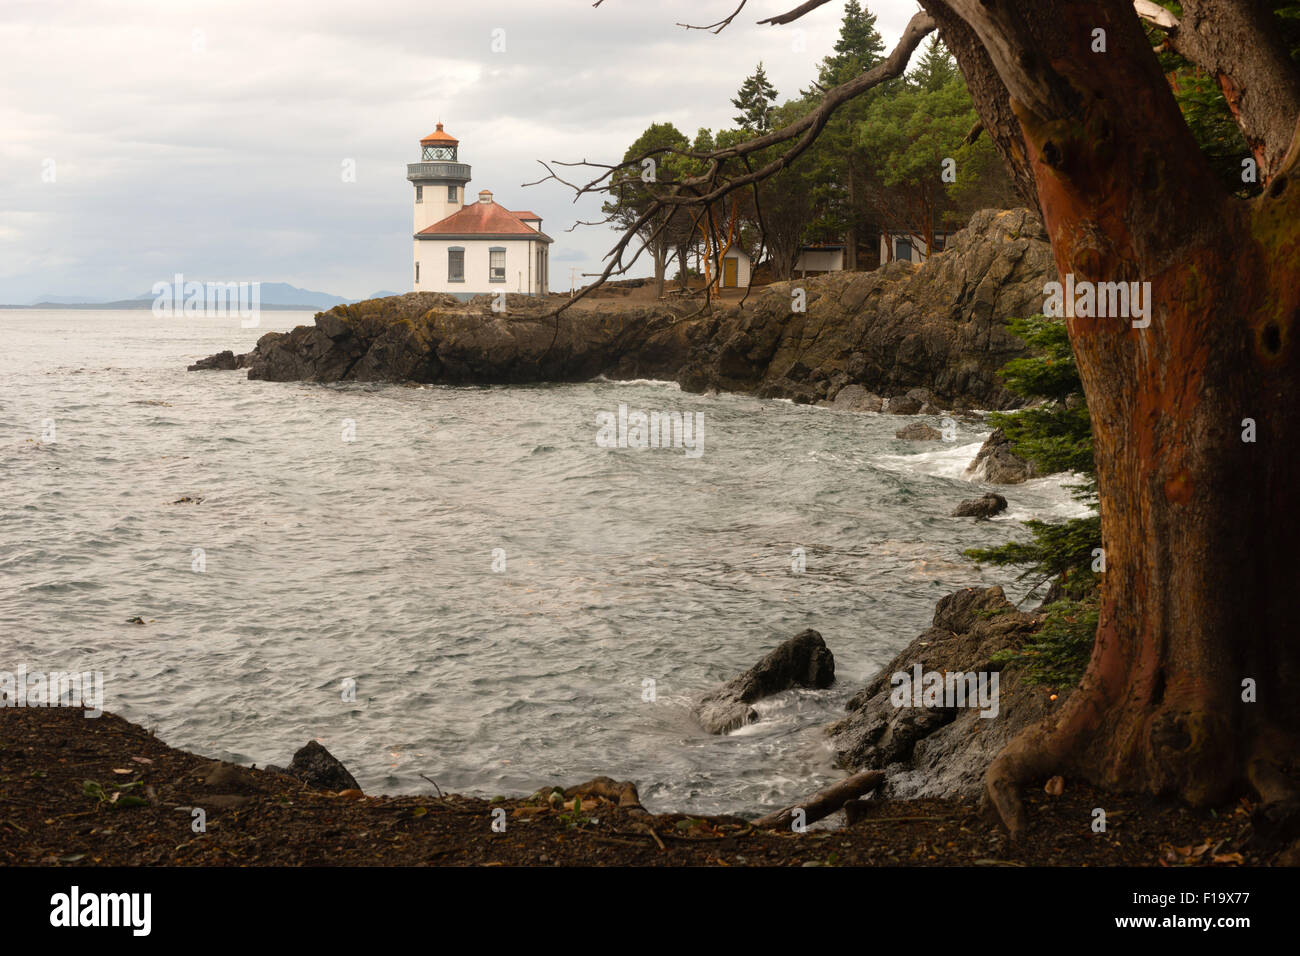 A storm is brewing as this strong Madrona Tree frames Lime Kiln Lighthouse on San Juan Island, Washington Stock Photo